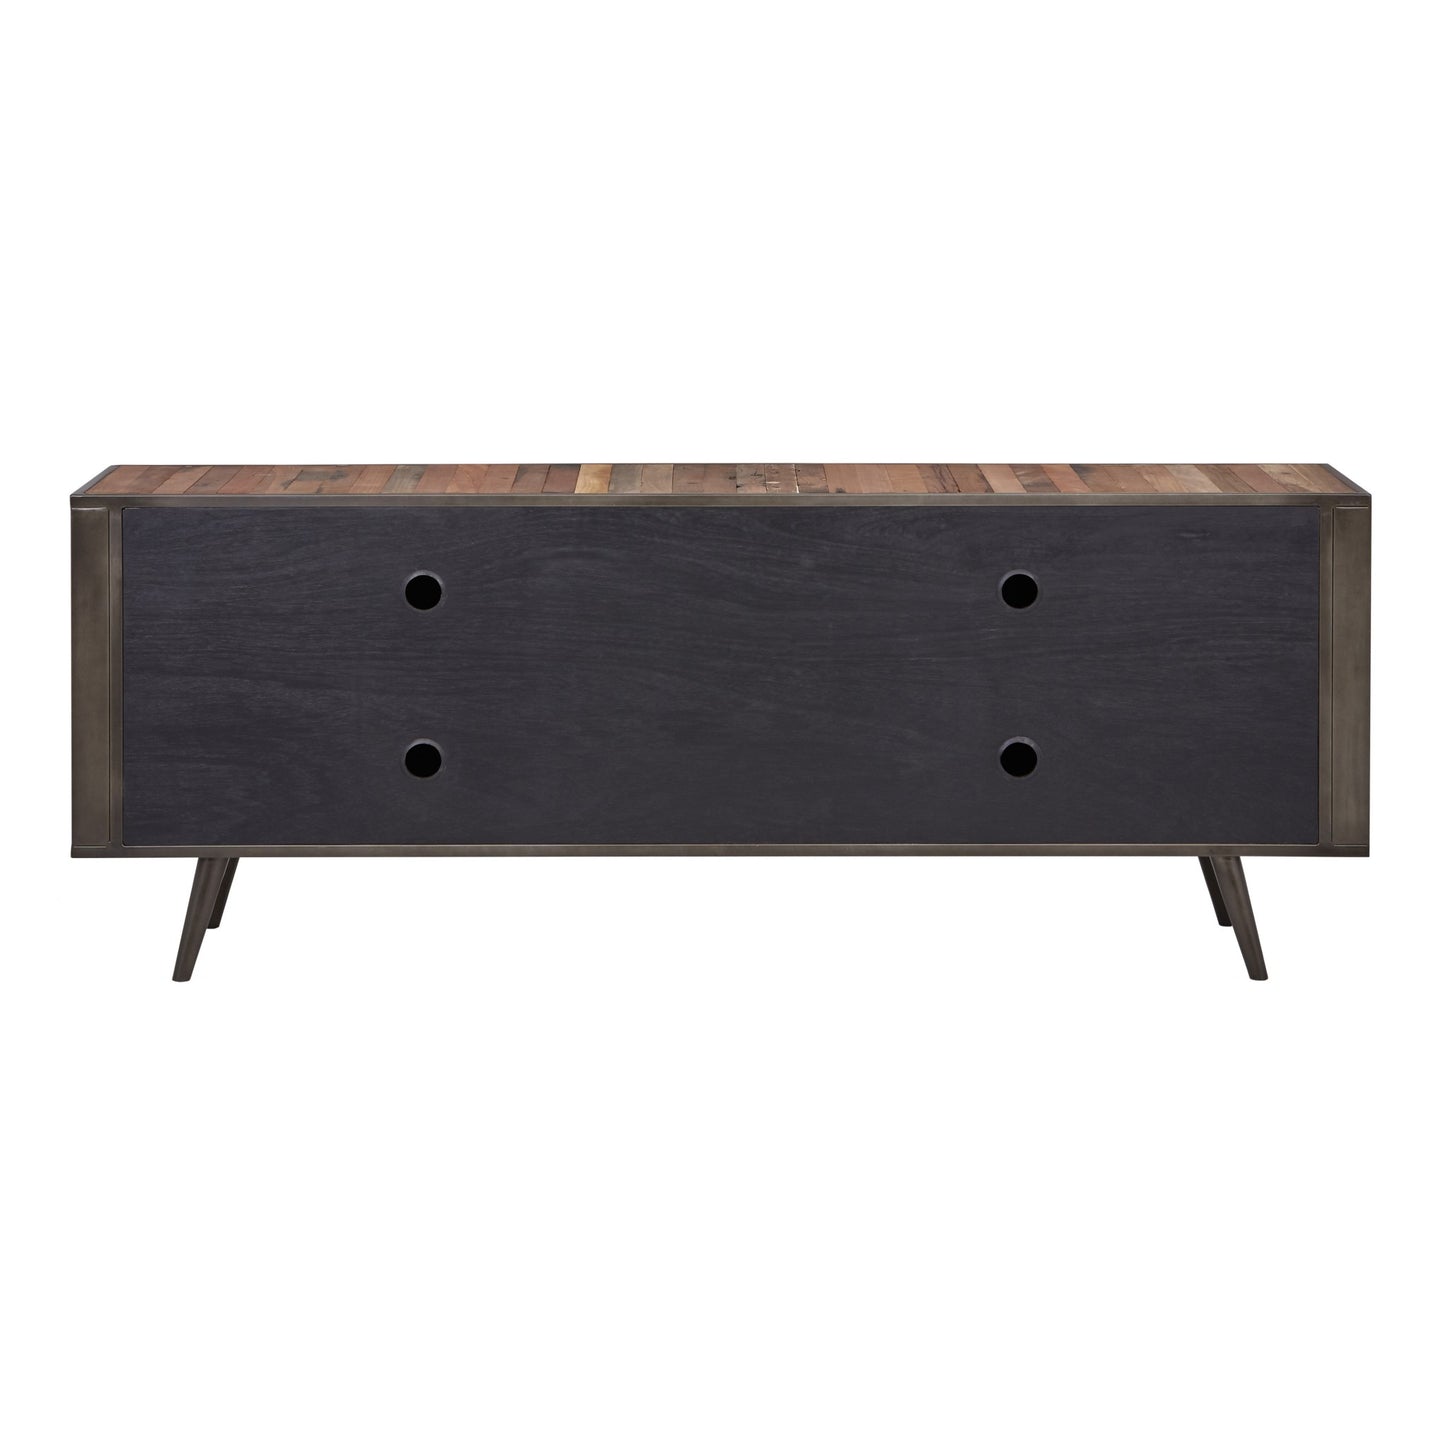 79" Wood Brown Recycled Boat Wood And Iron Cabinet Enclosed Storage TV Stand